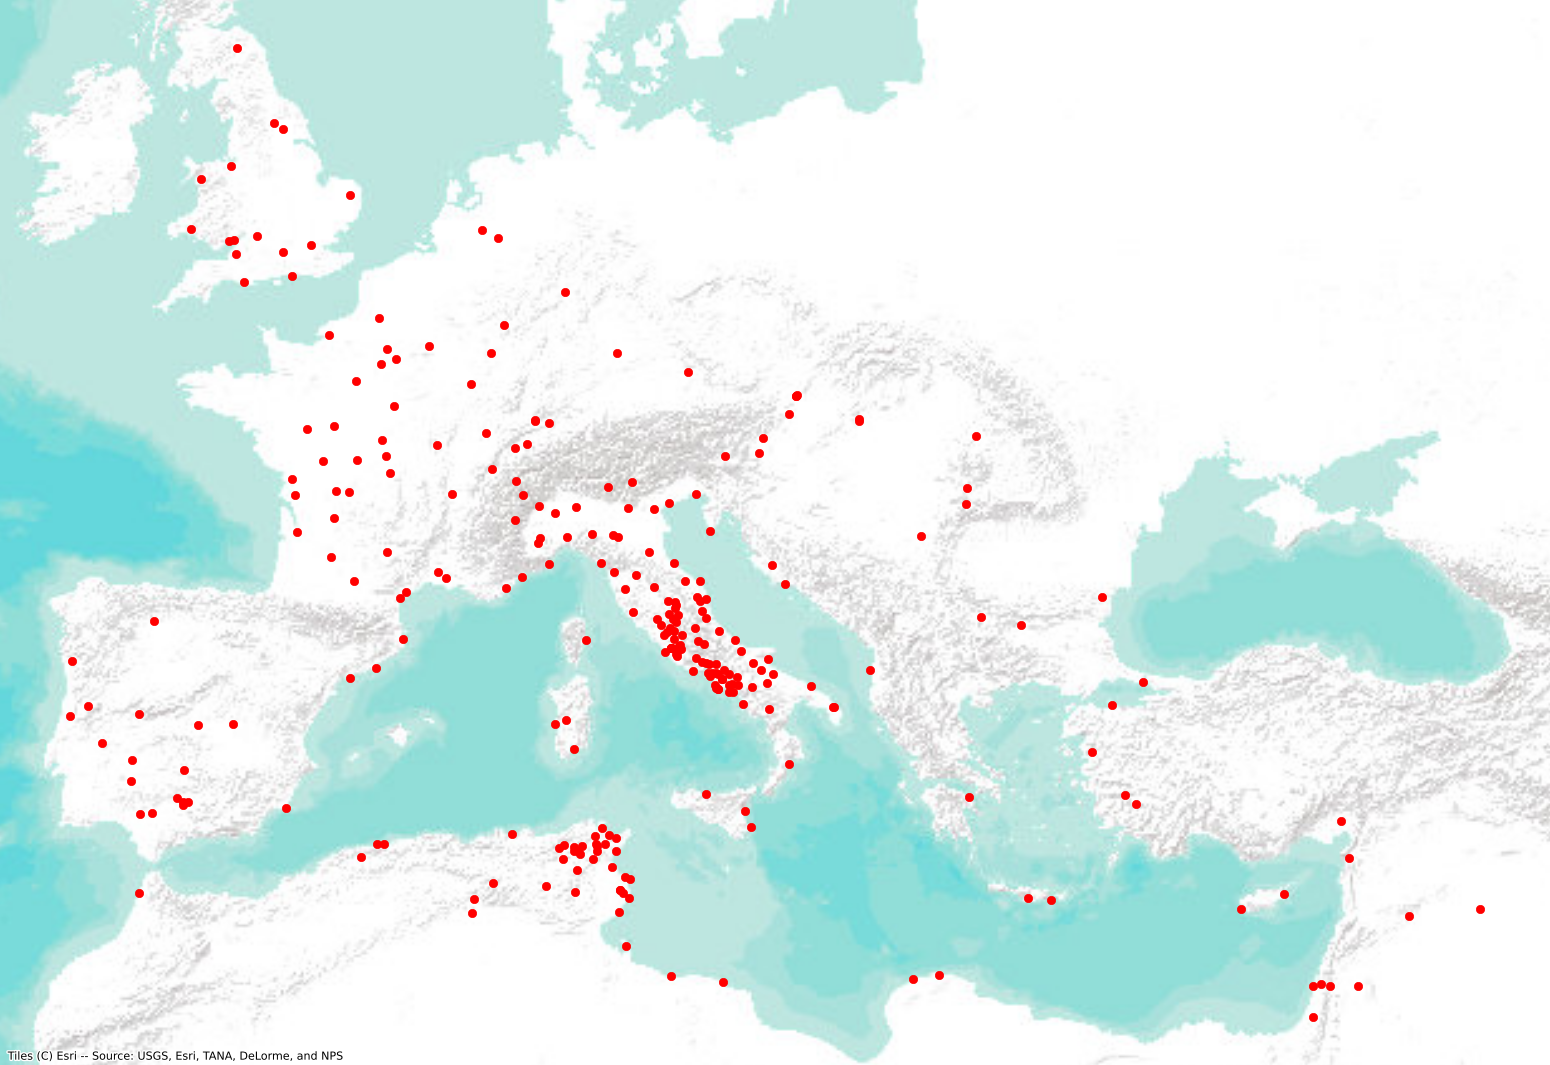 all-roman-amphitheaters-map.png